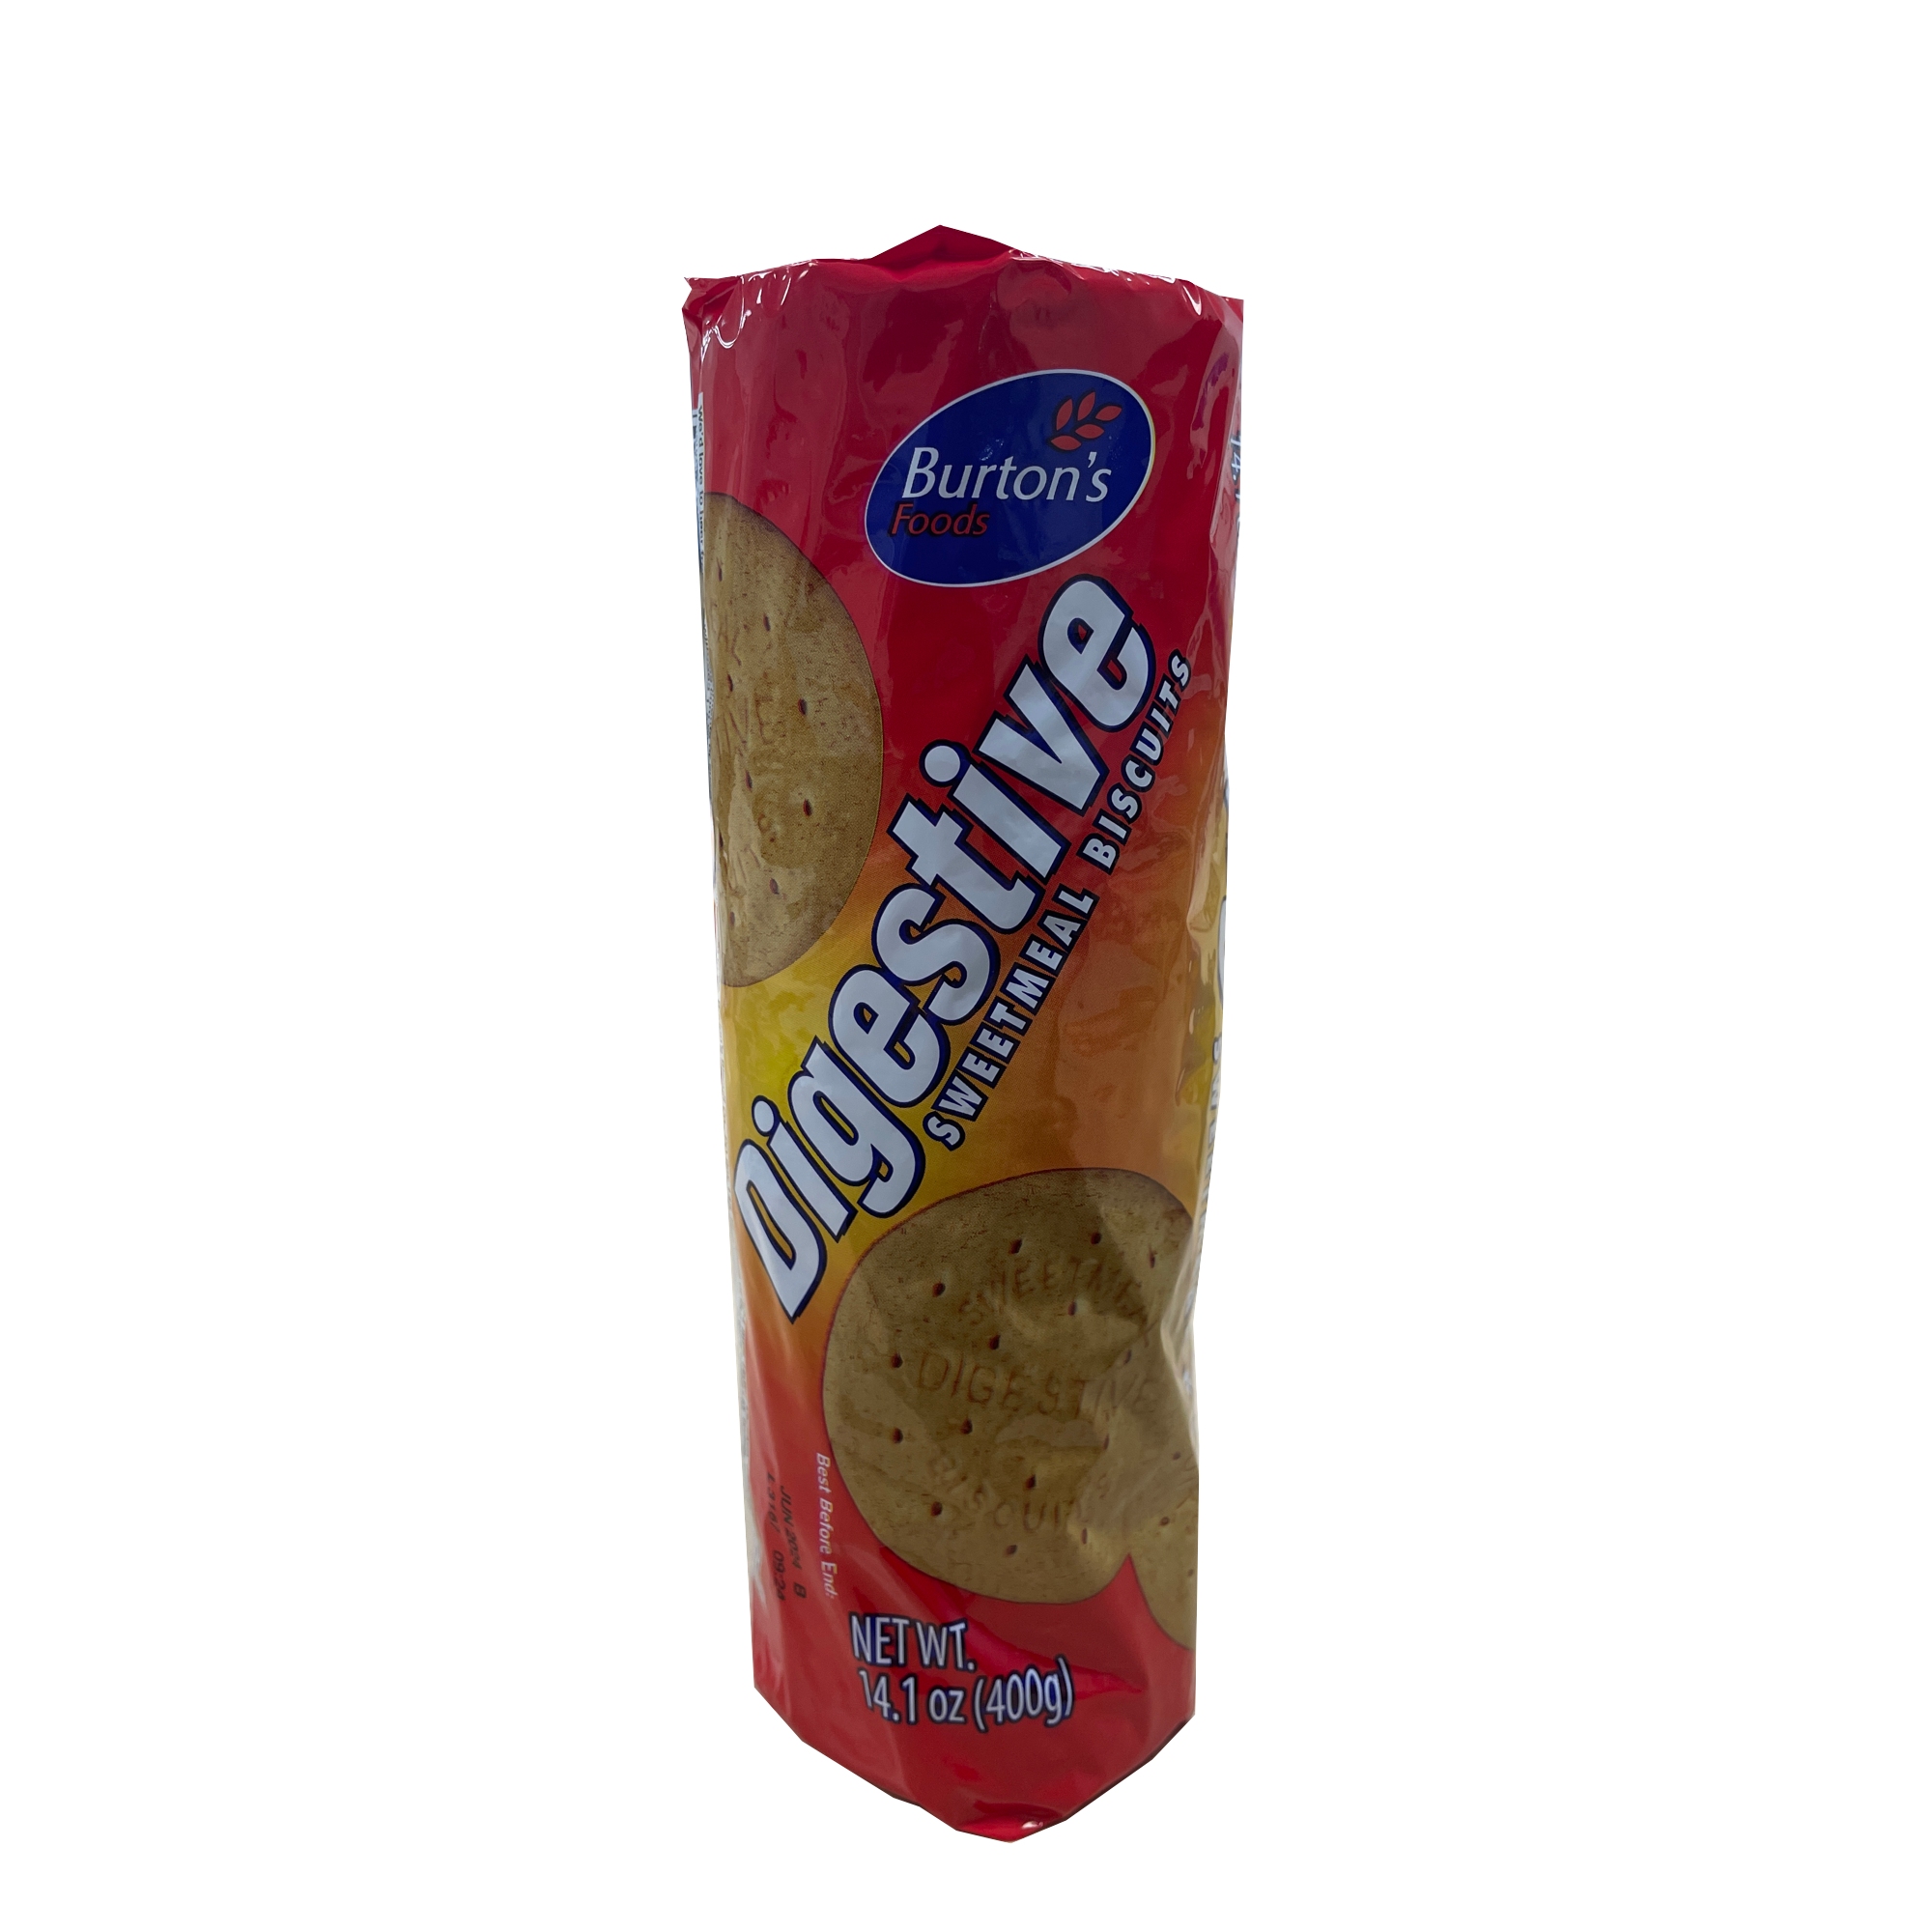 DIGESTIVE SWEETMEAL BISCUITS SN700001